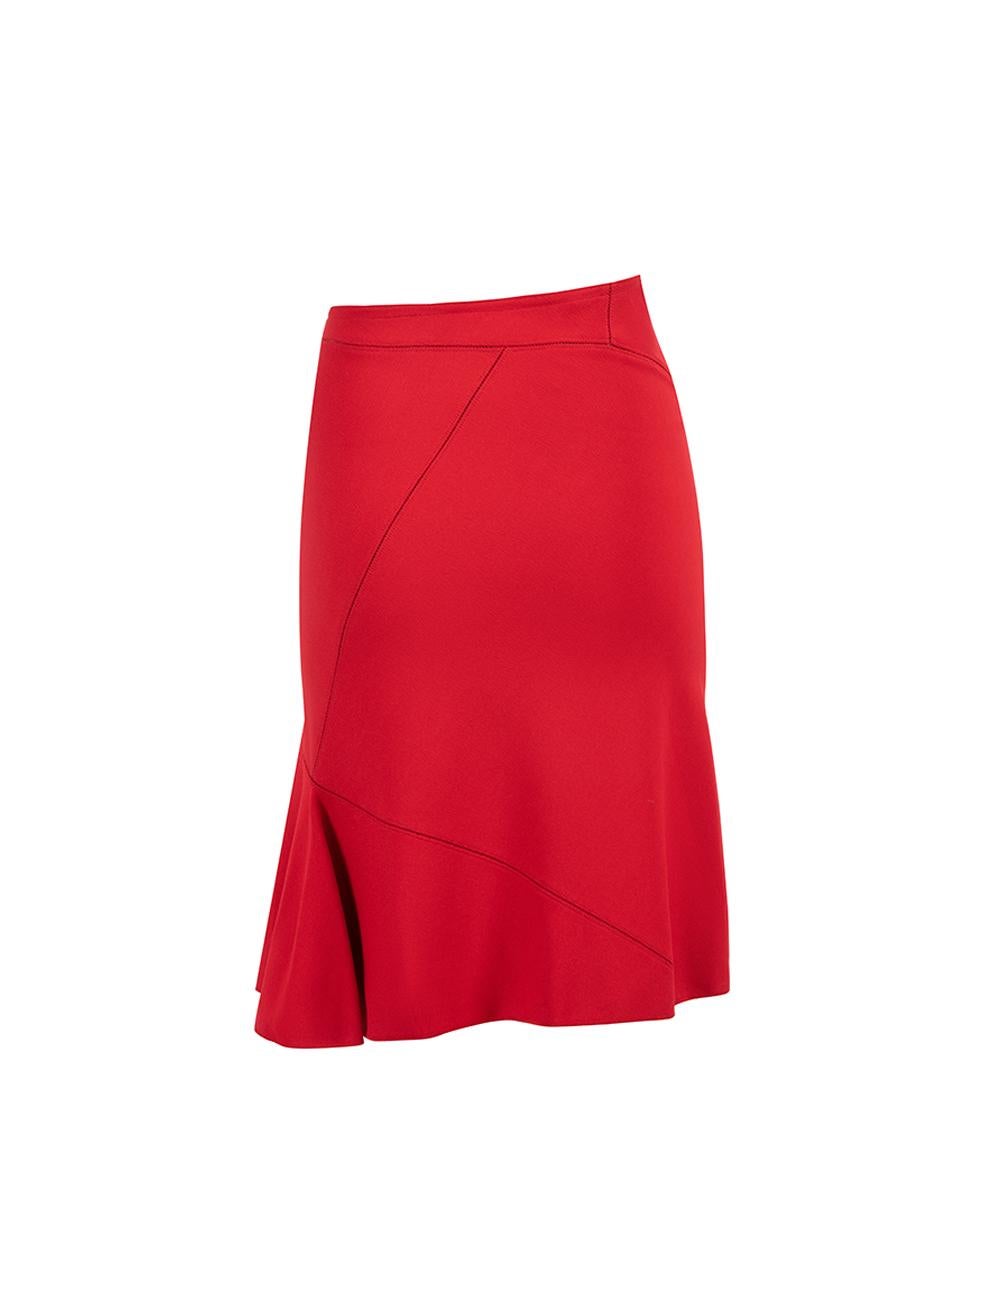 Pre-Loved Alaïa Women's Red Stitched Together Pencil Skirt In Excellent Condition For Sale In London, GB